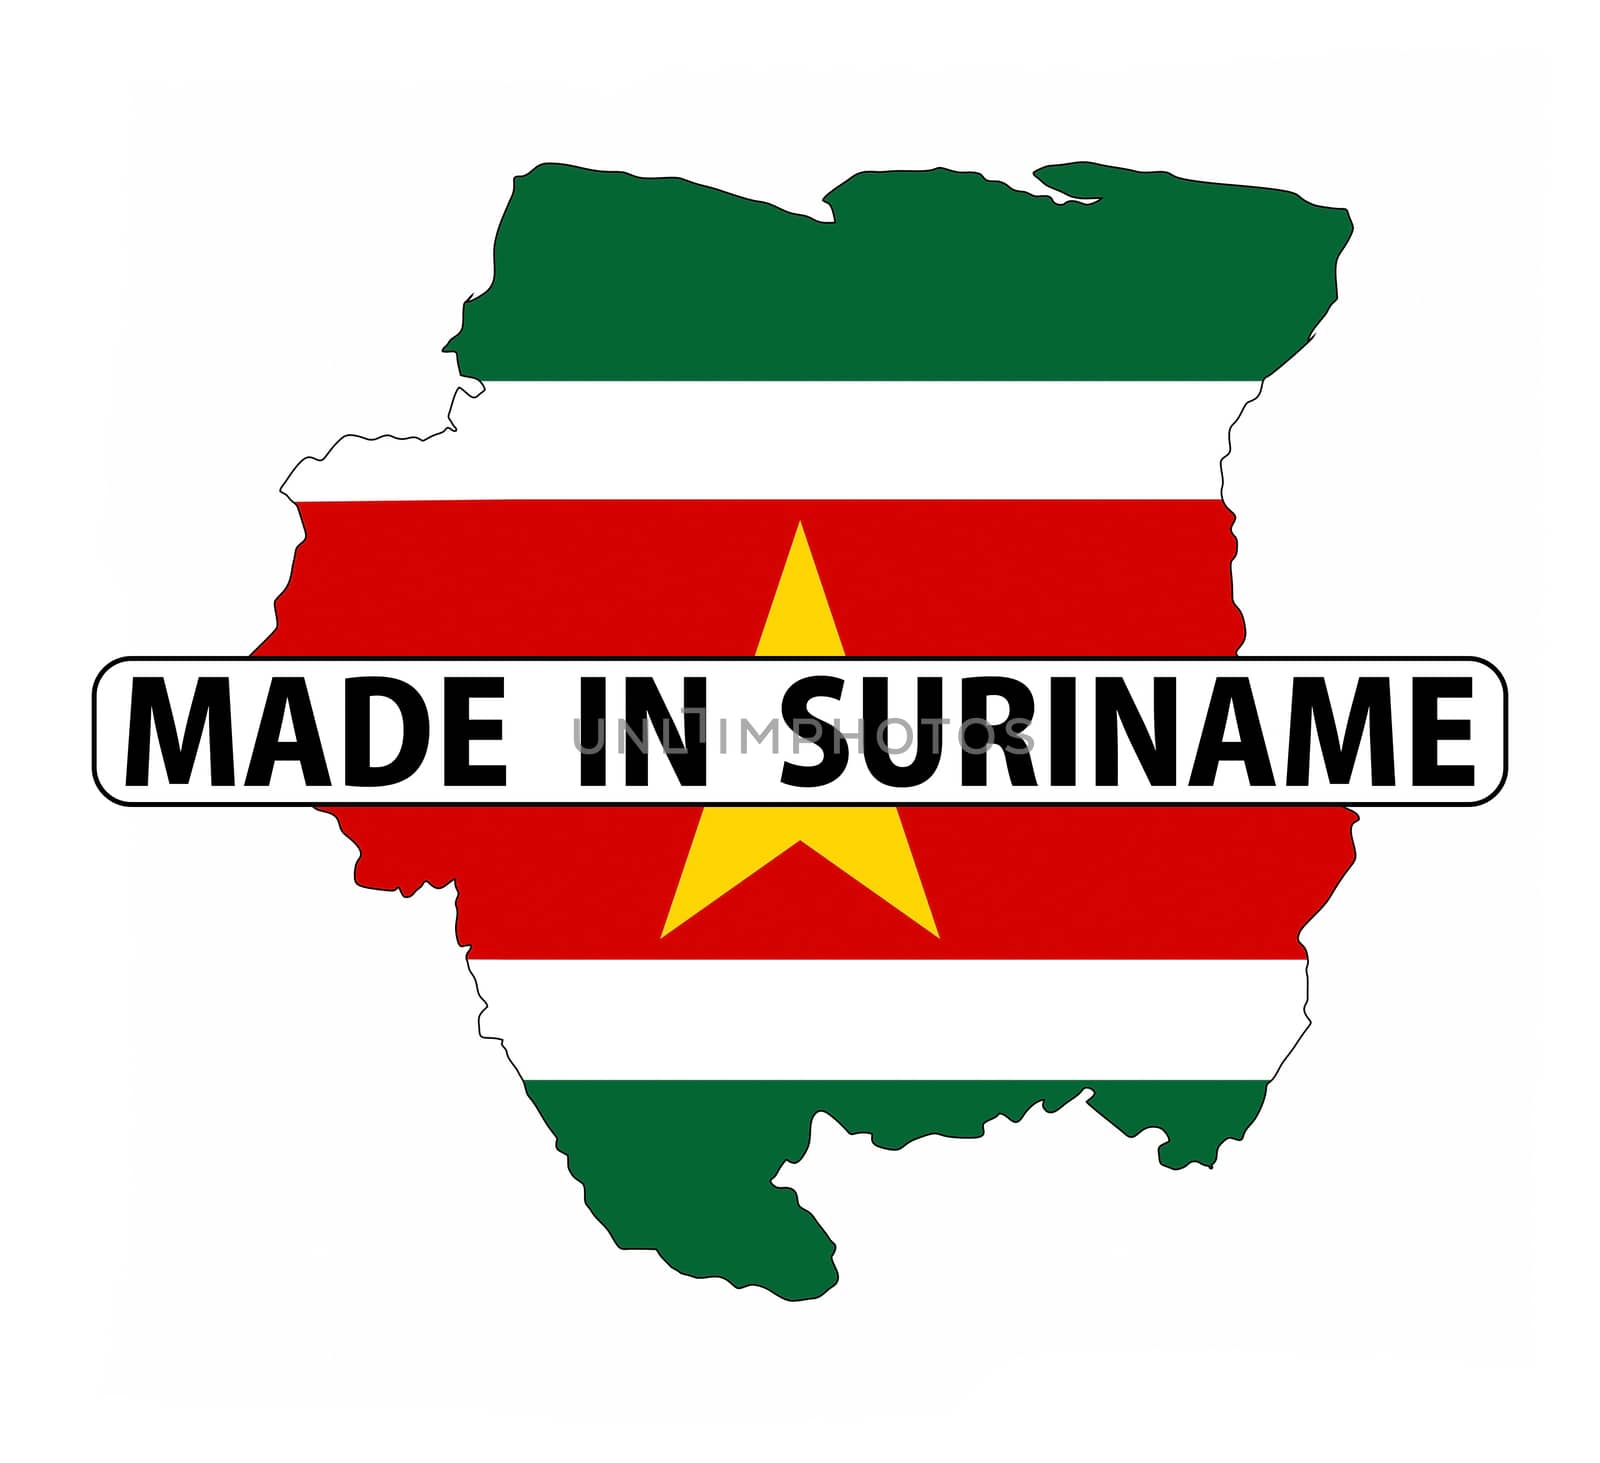 made in suriname by tony4urban